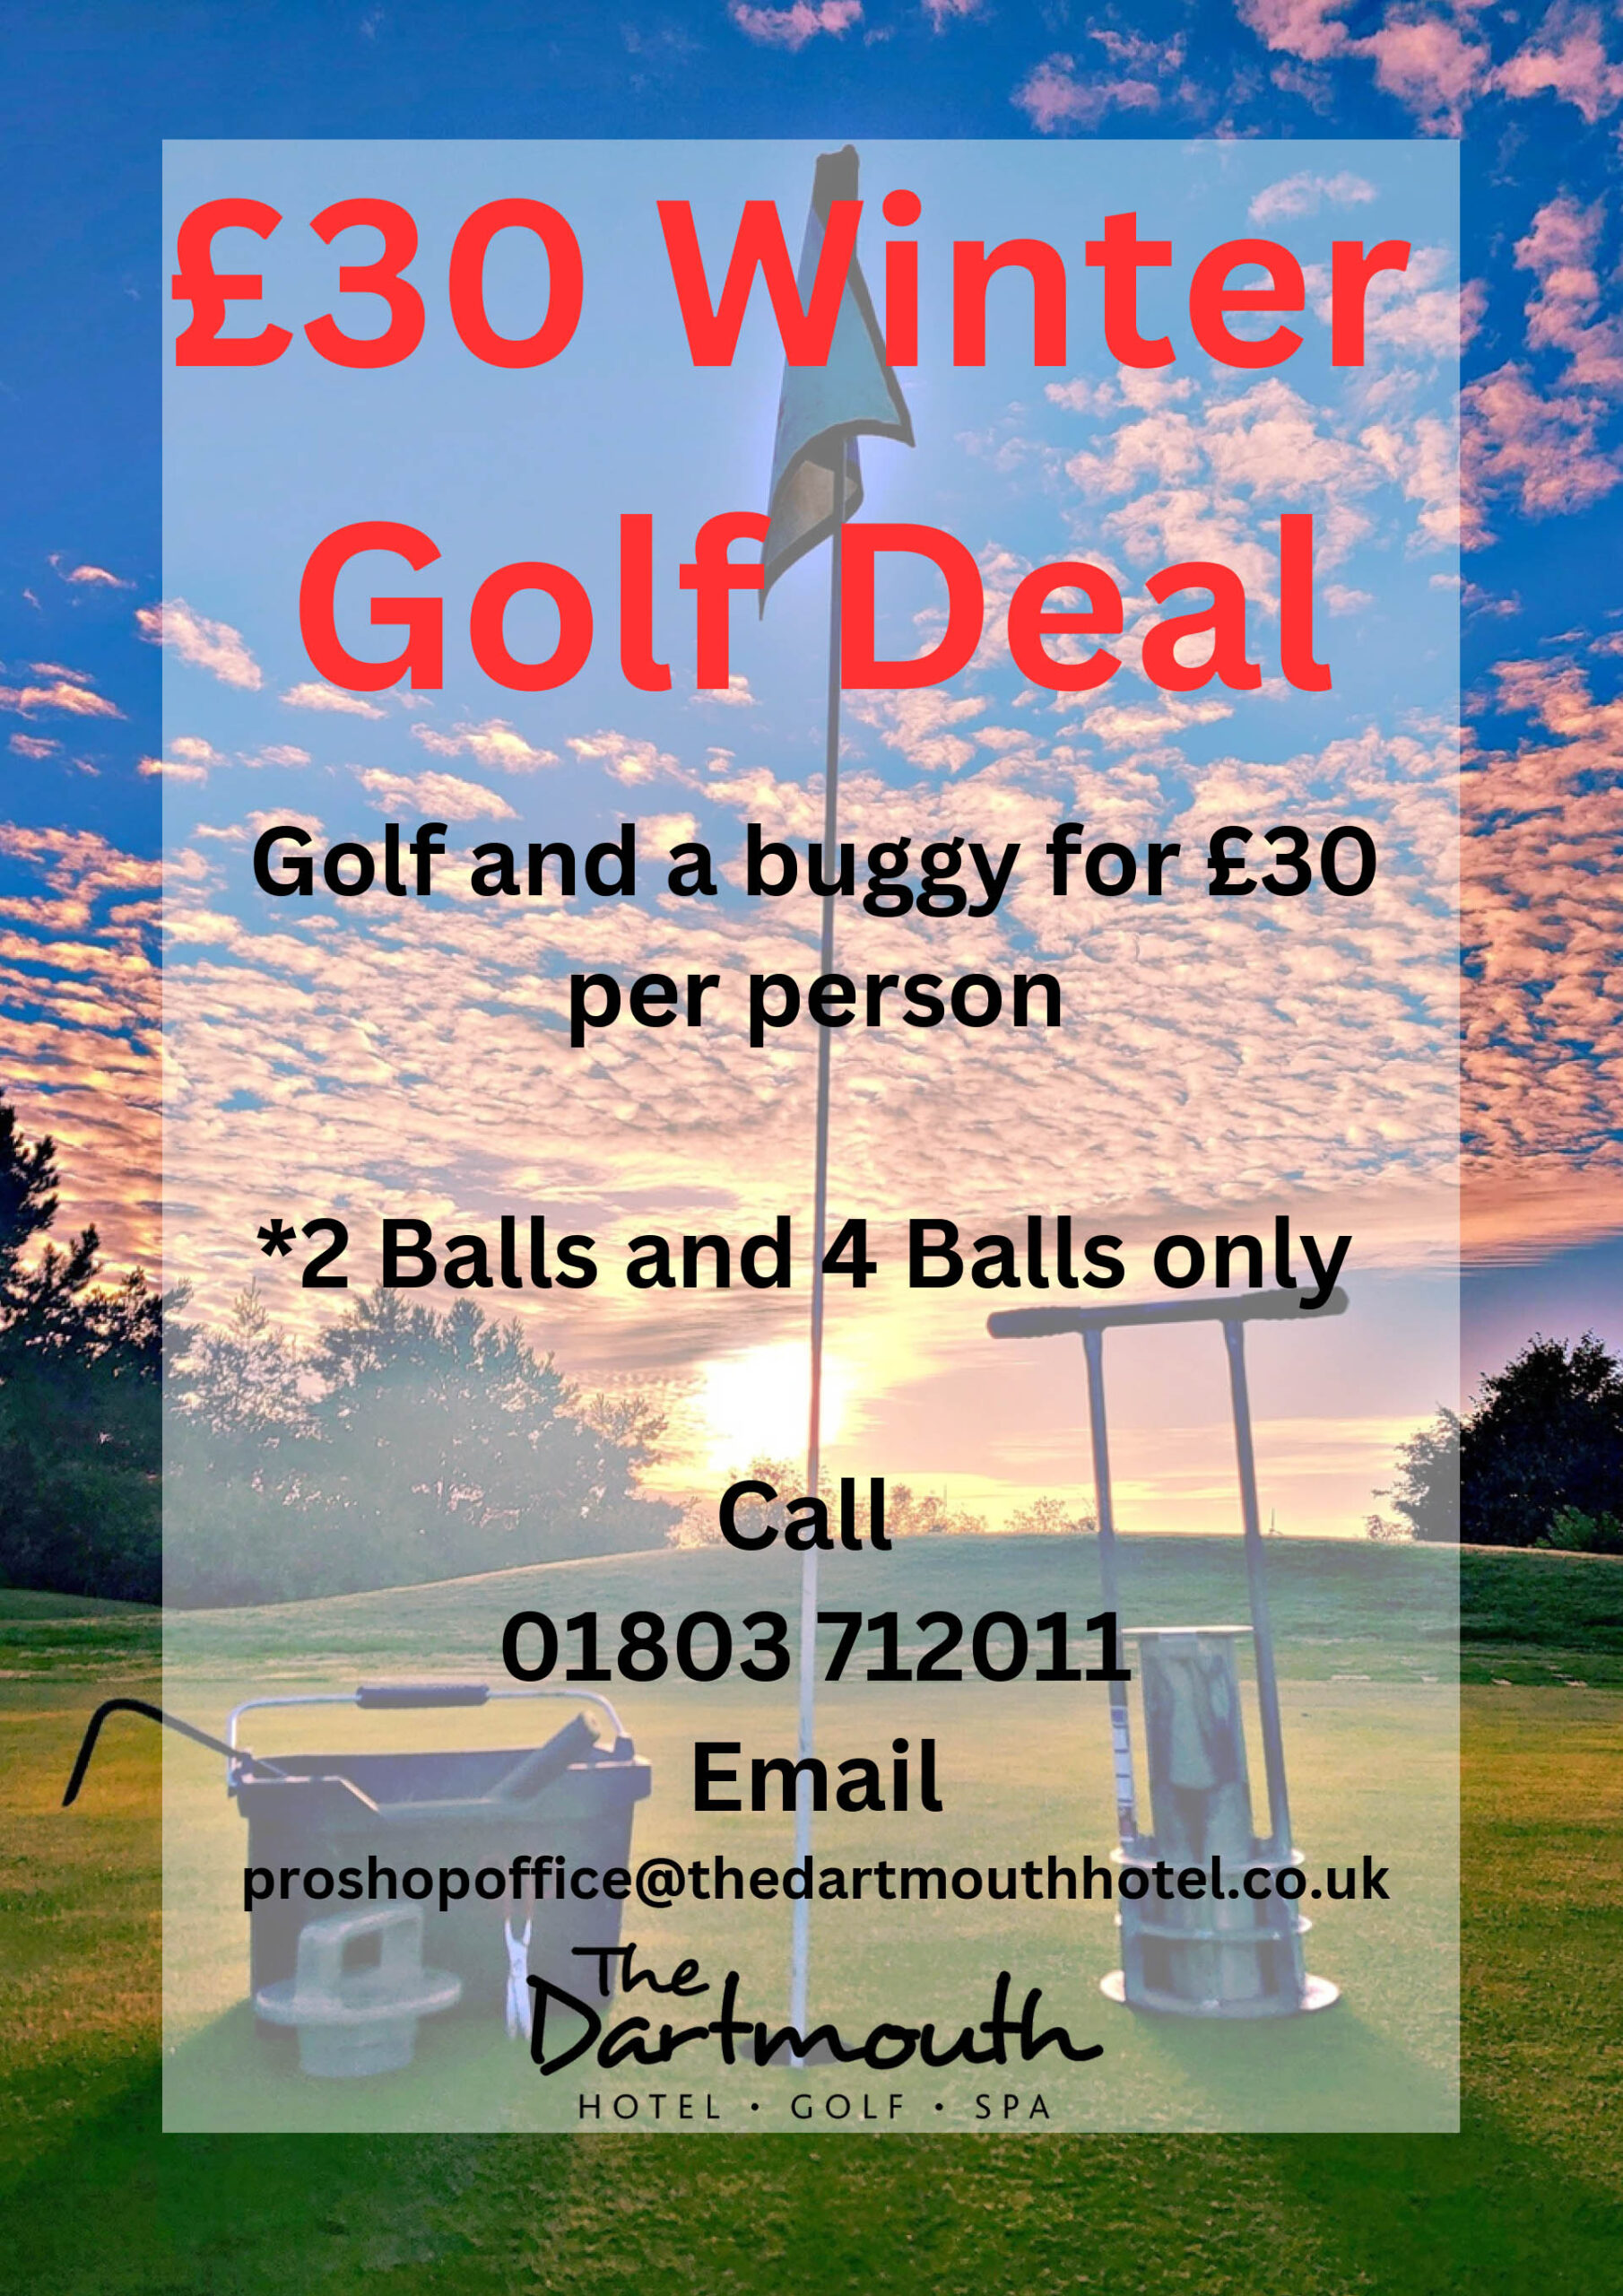 £30 Winter Golf Deal at the Dartmouth Hotel Golf & Spa